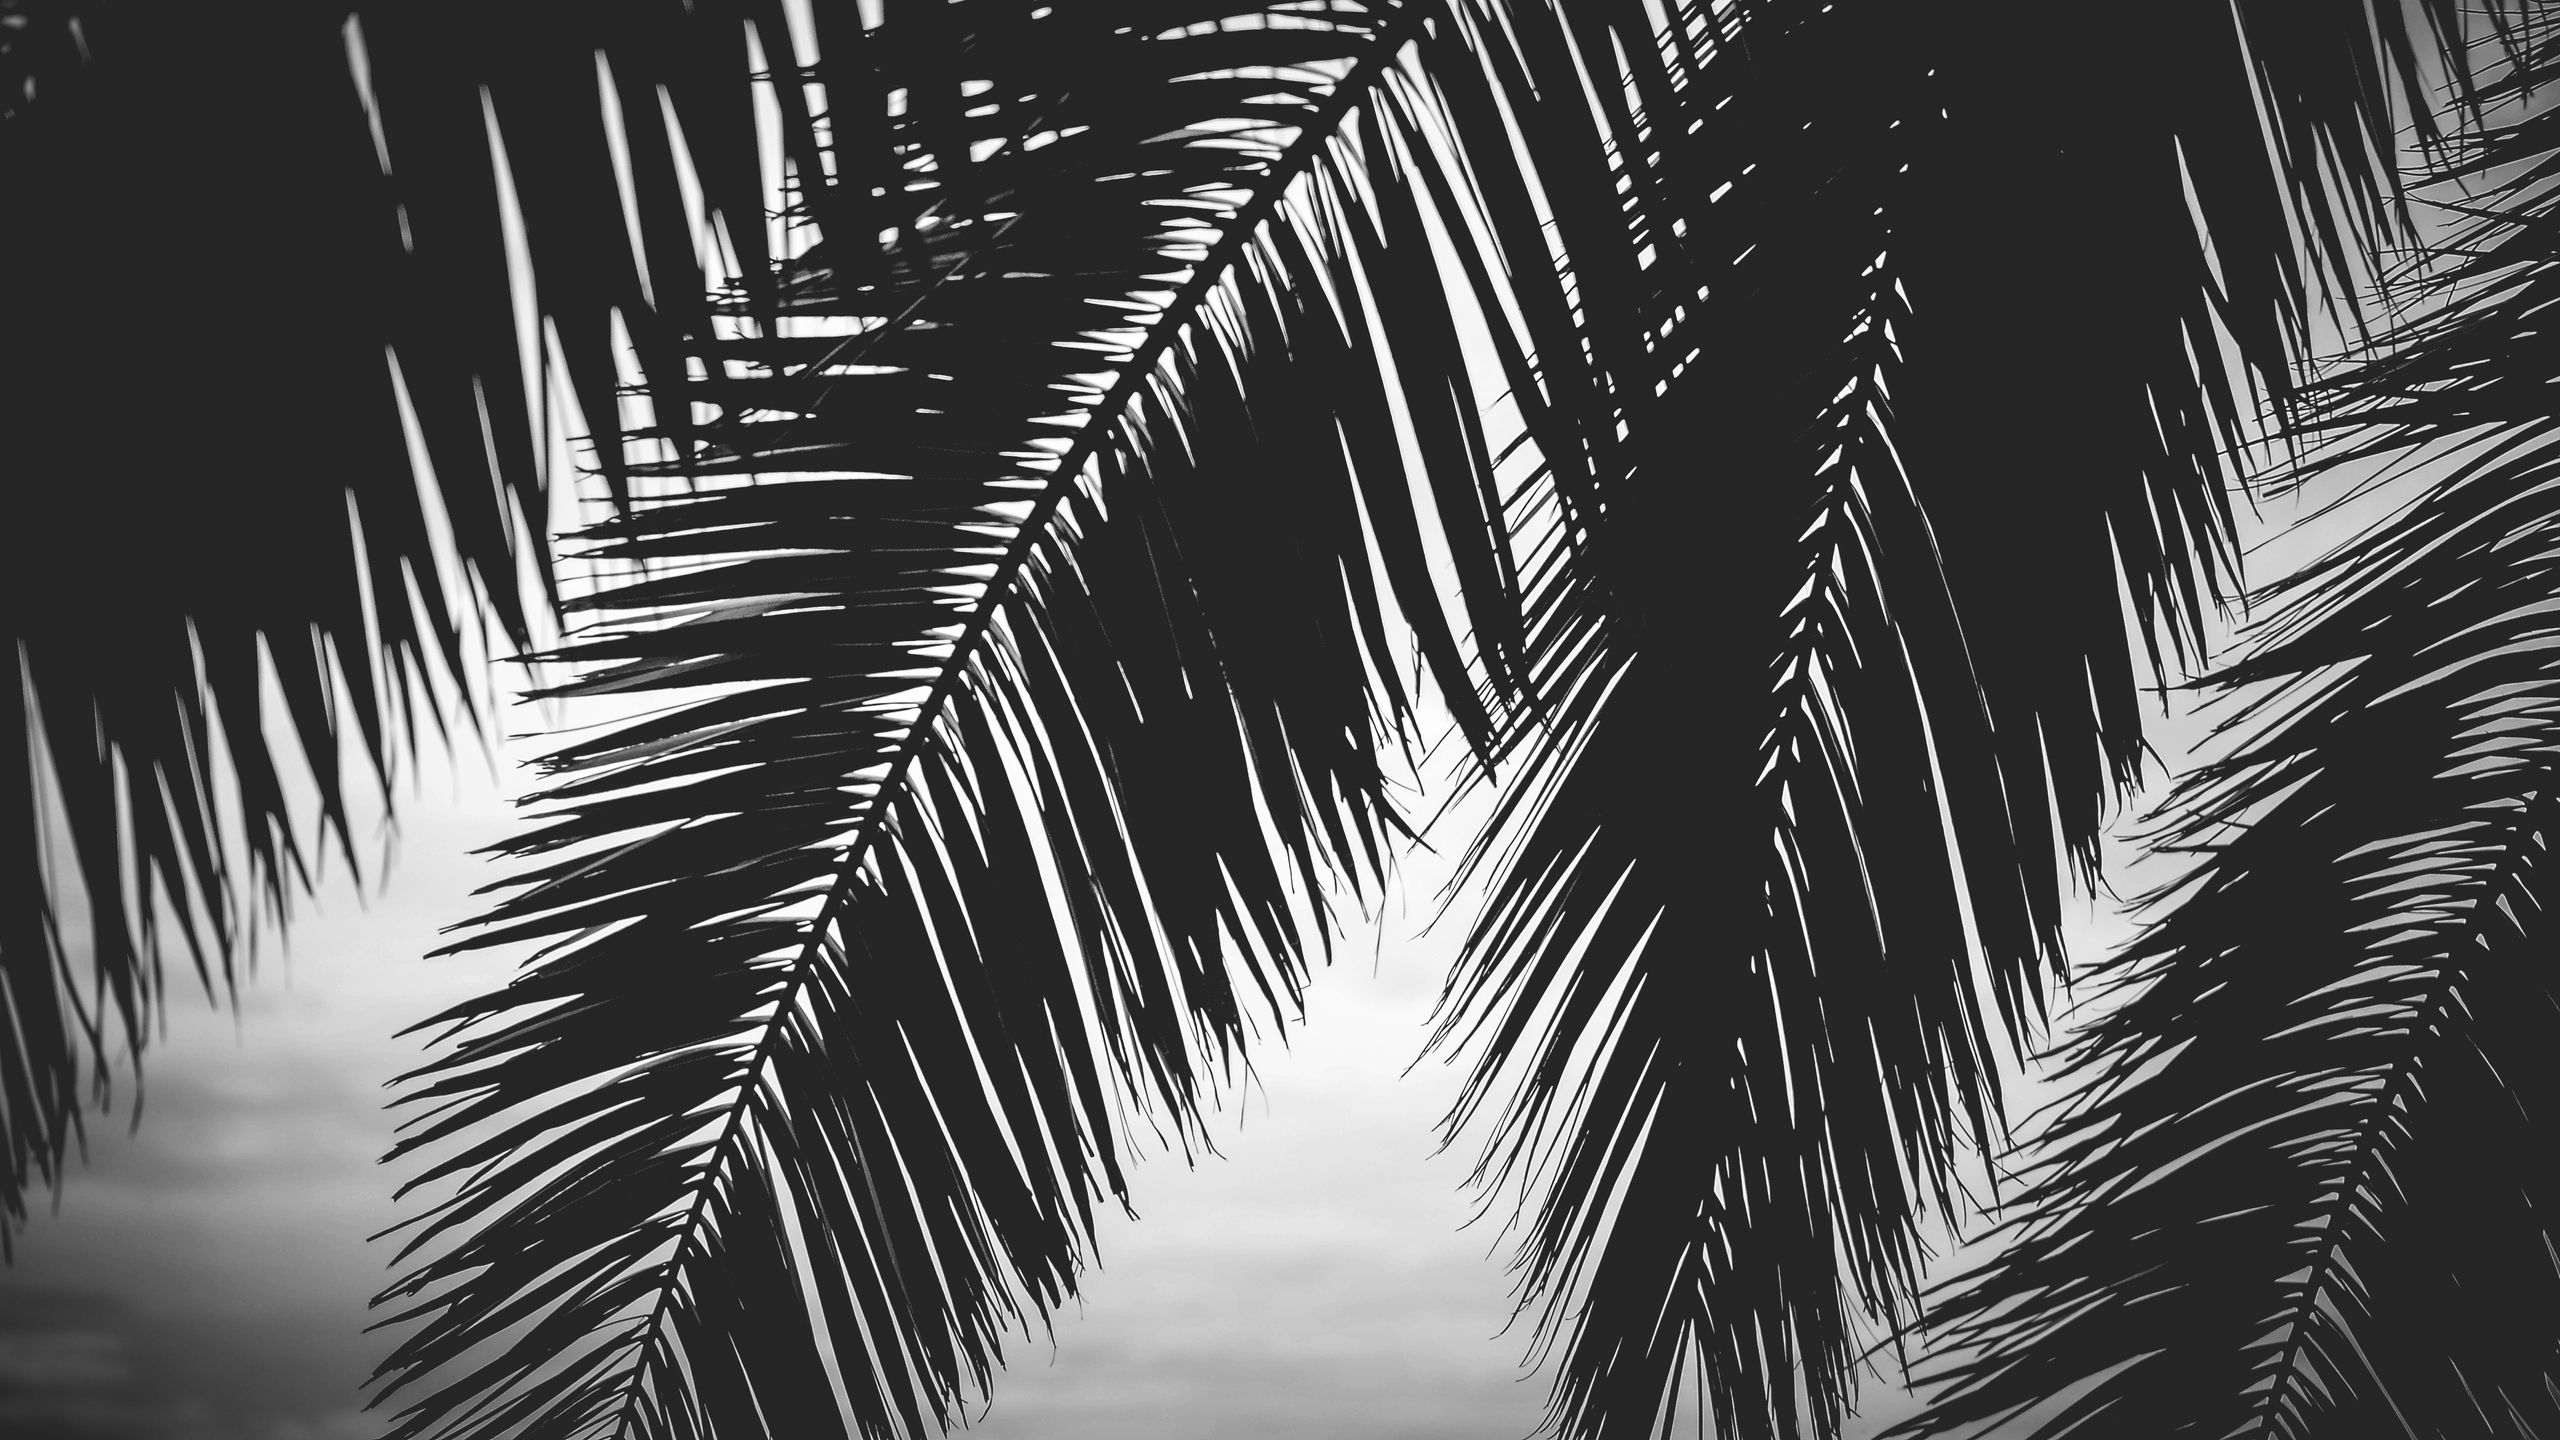 Download wallpaper 2560x1440 palm tree, leaves, silhouettes, black and ...